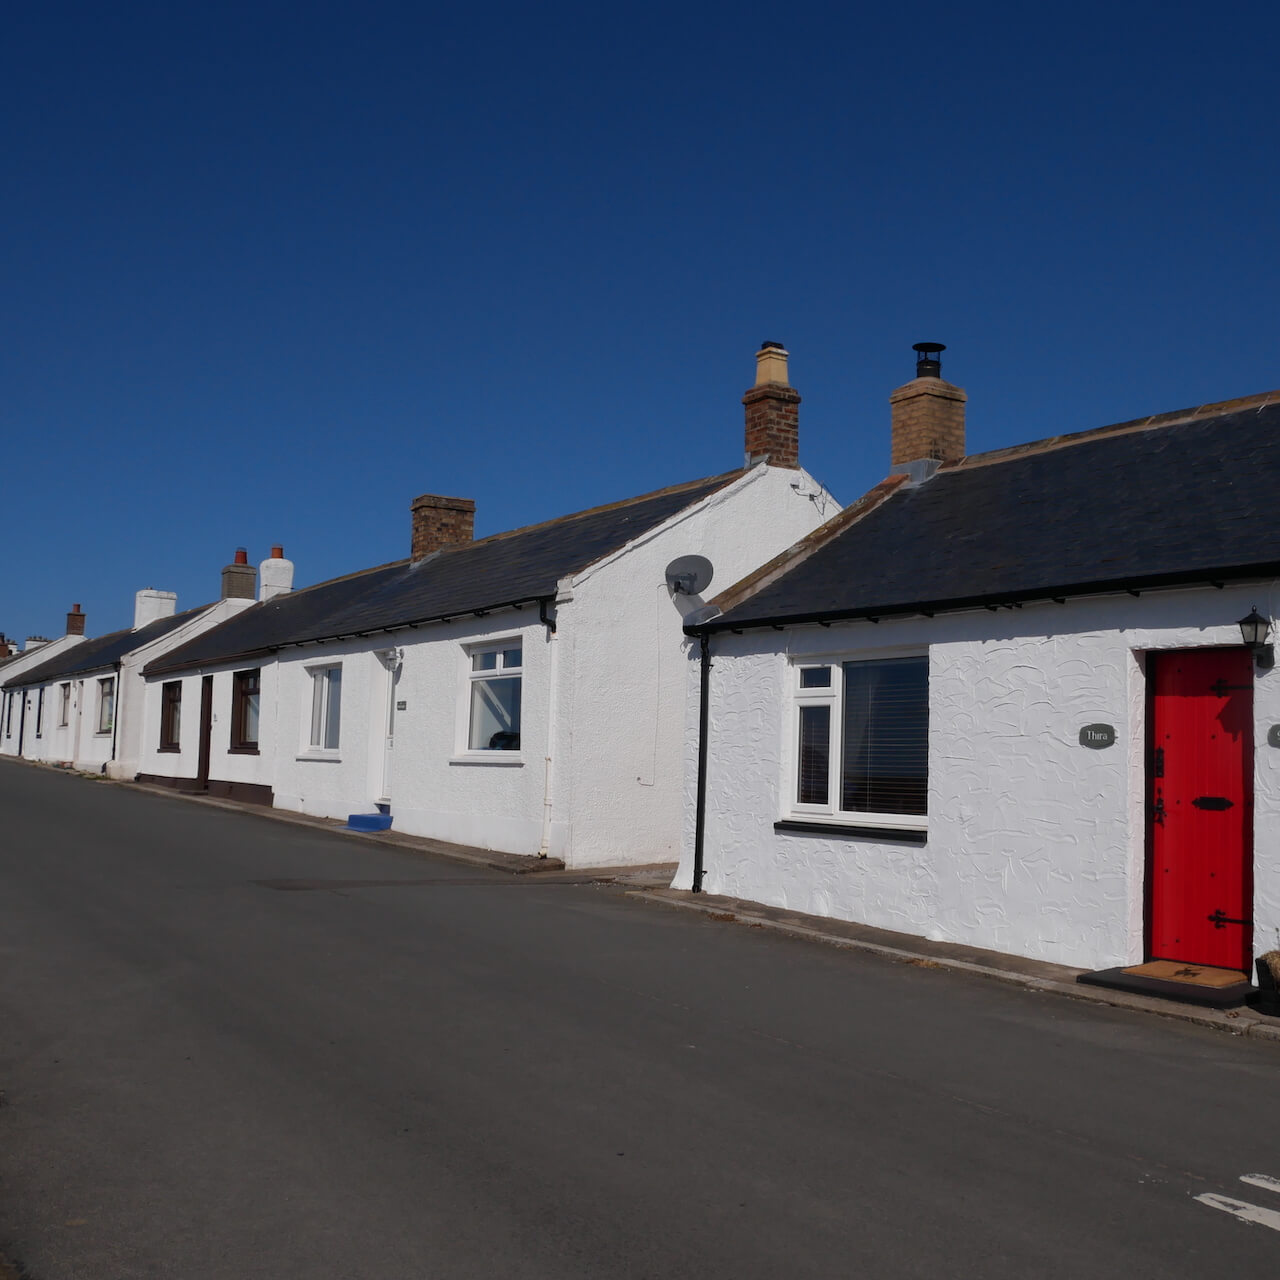 More cottages in Powfoot